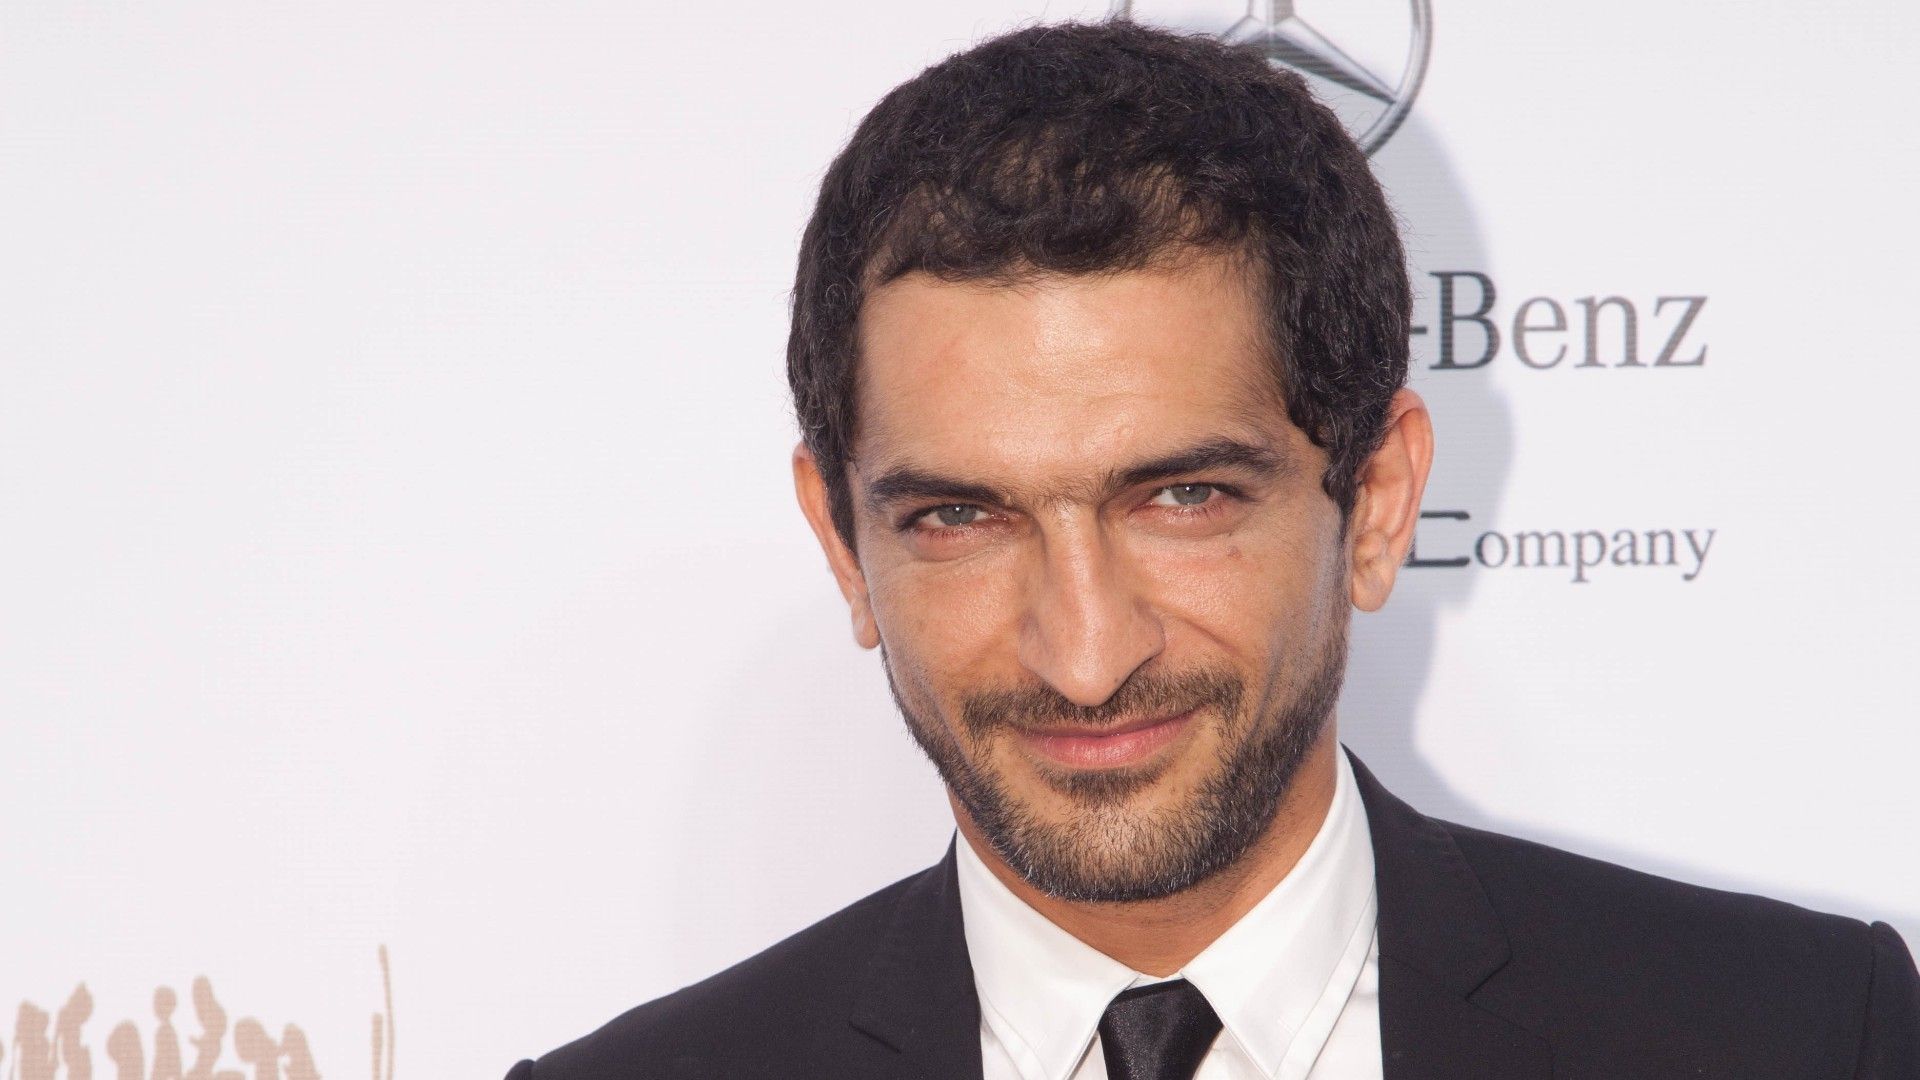 Egyptian actor Amr Waked had coronavirus but is now 'cured'